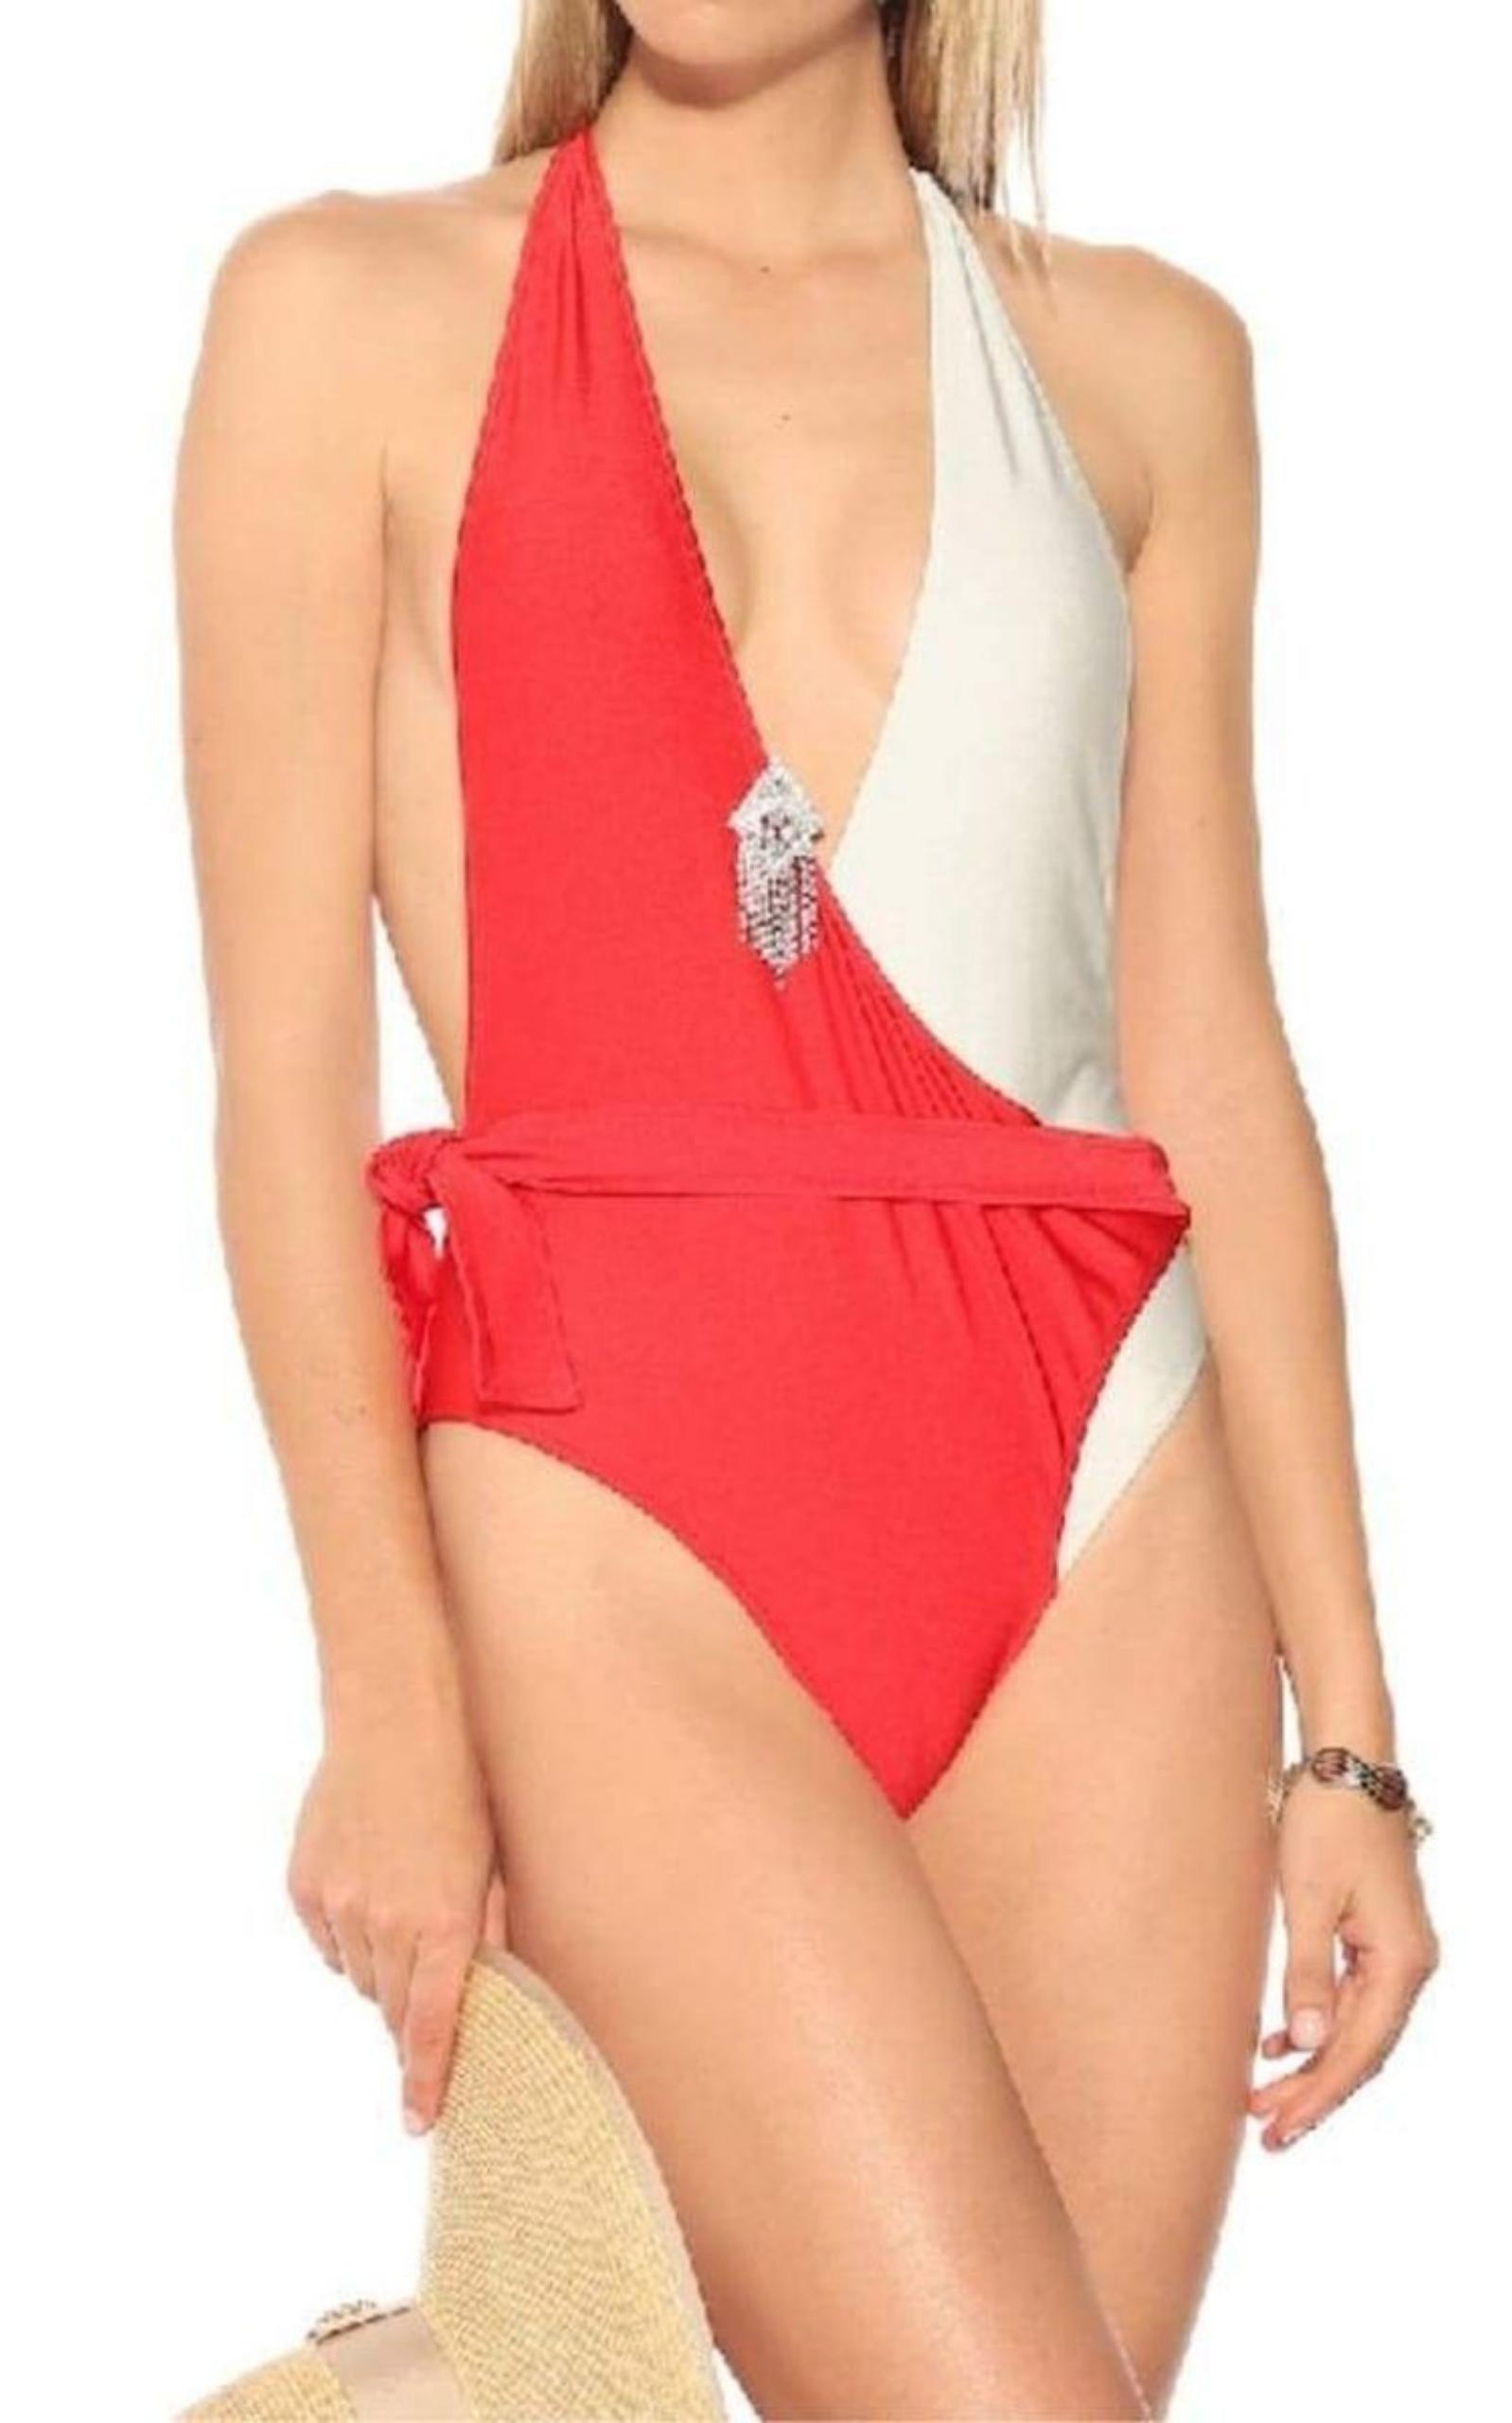 Gucci One-Pieces/ Swimsuits